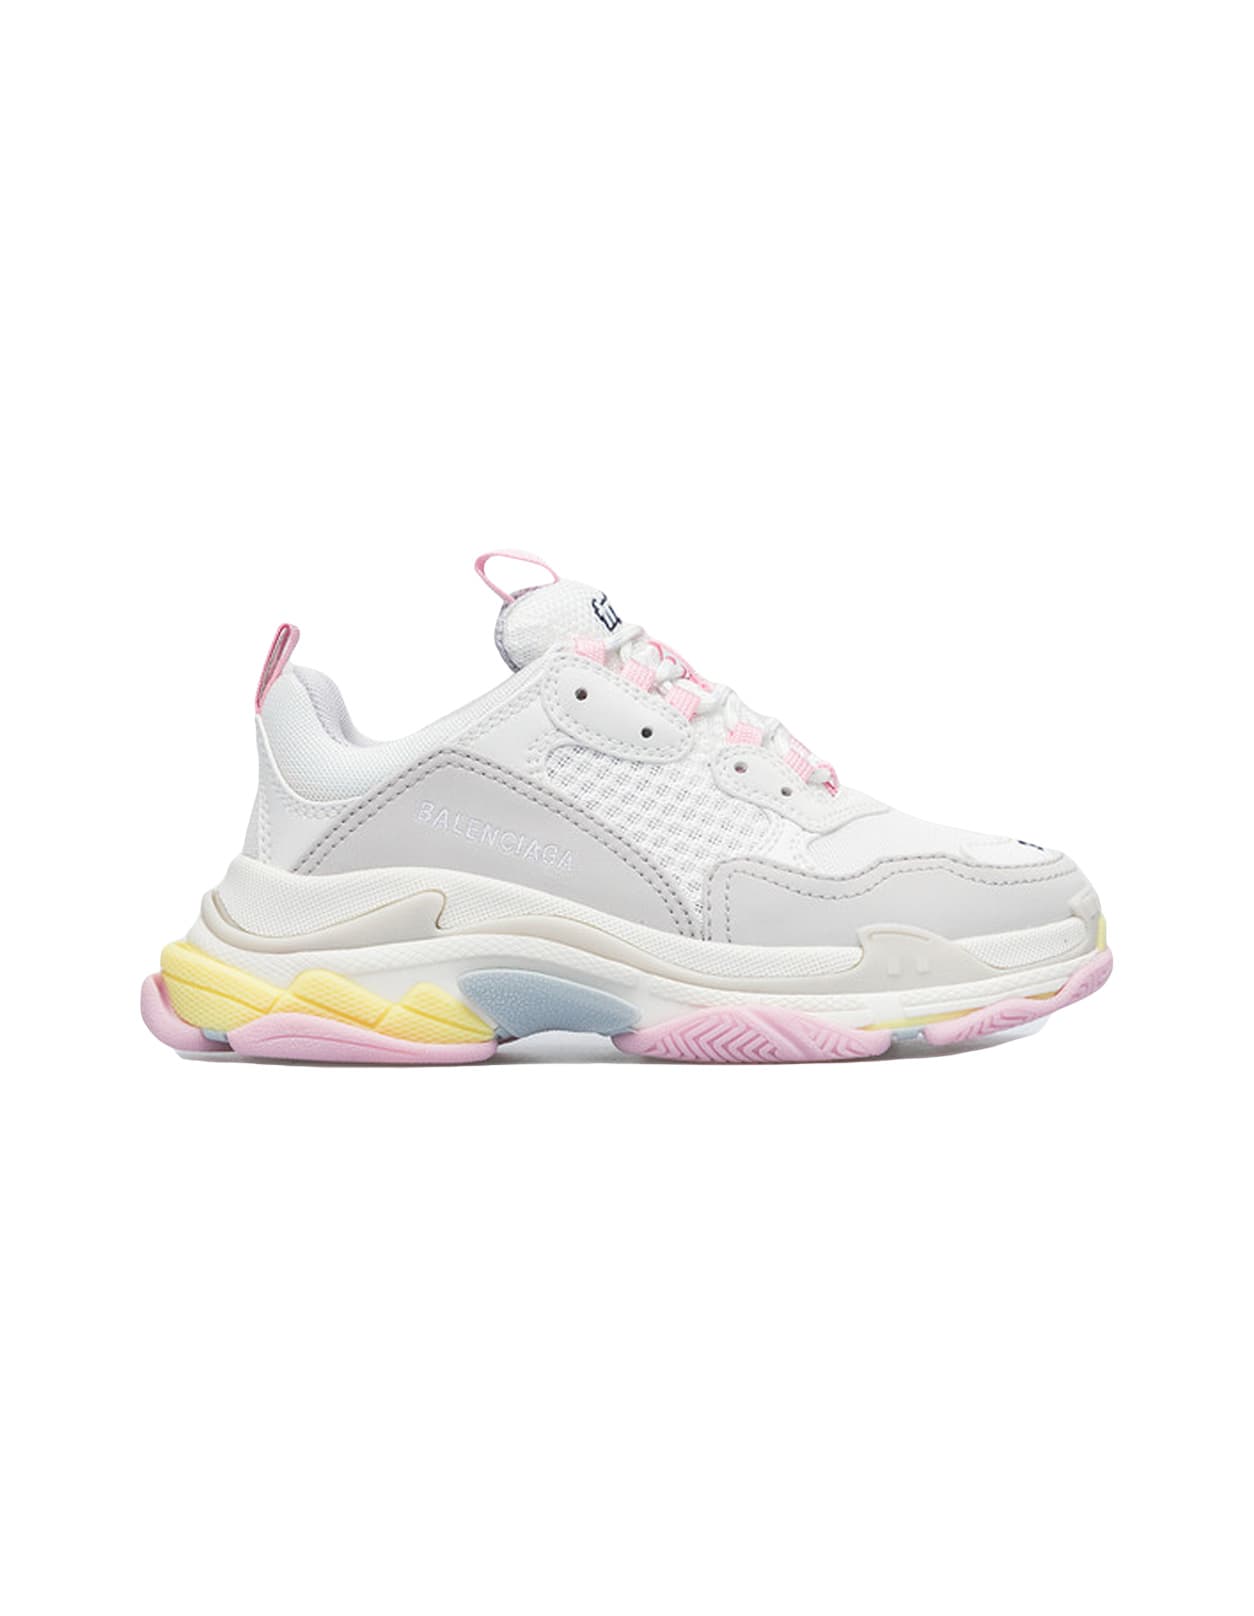 Balenciaga Triple S Sneakers In White With Pastel Multicolor Details